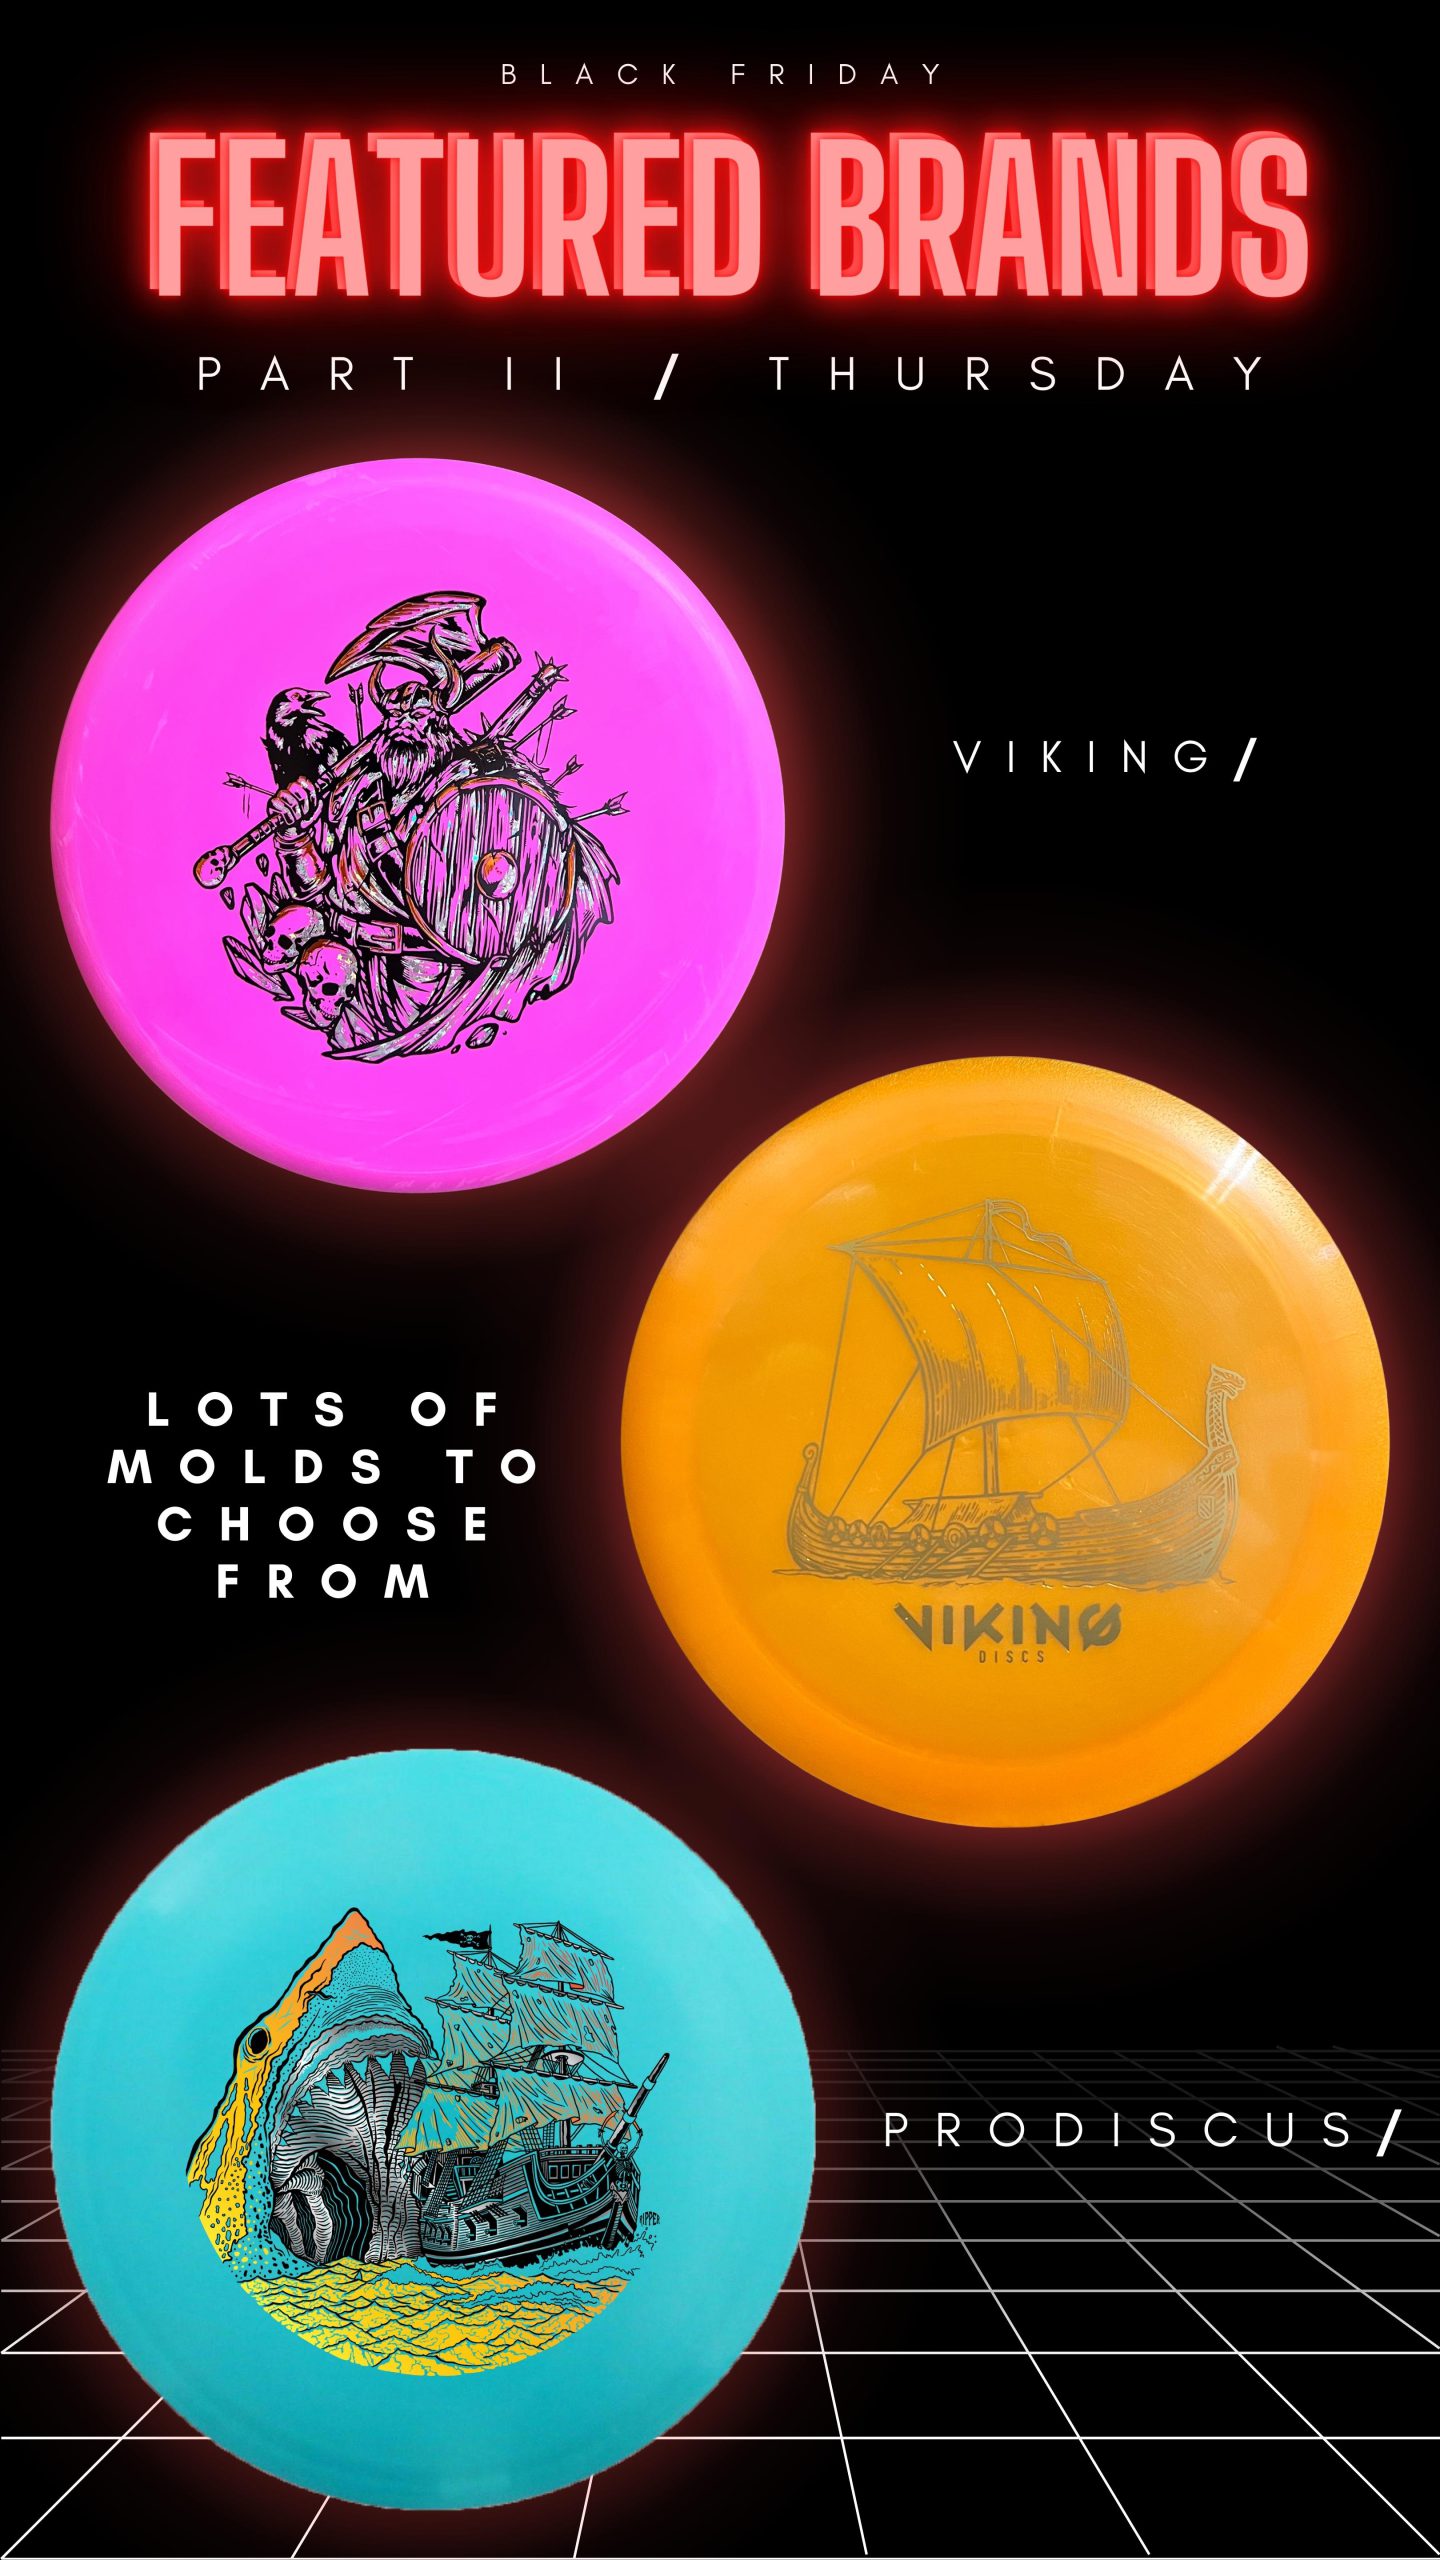 Viking and Prodiscus Special Edition Thursday Cyber week releases.